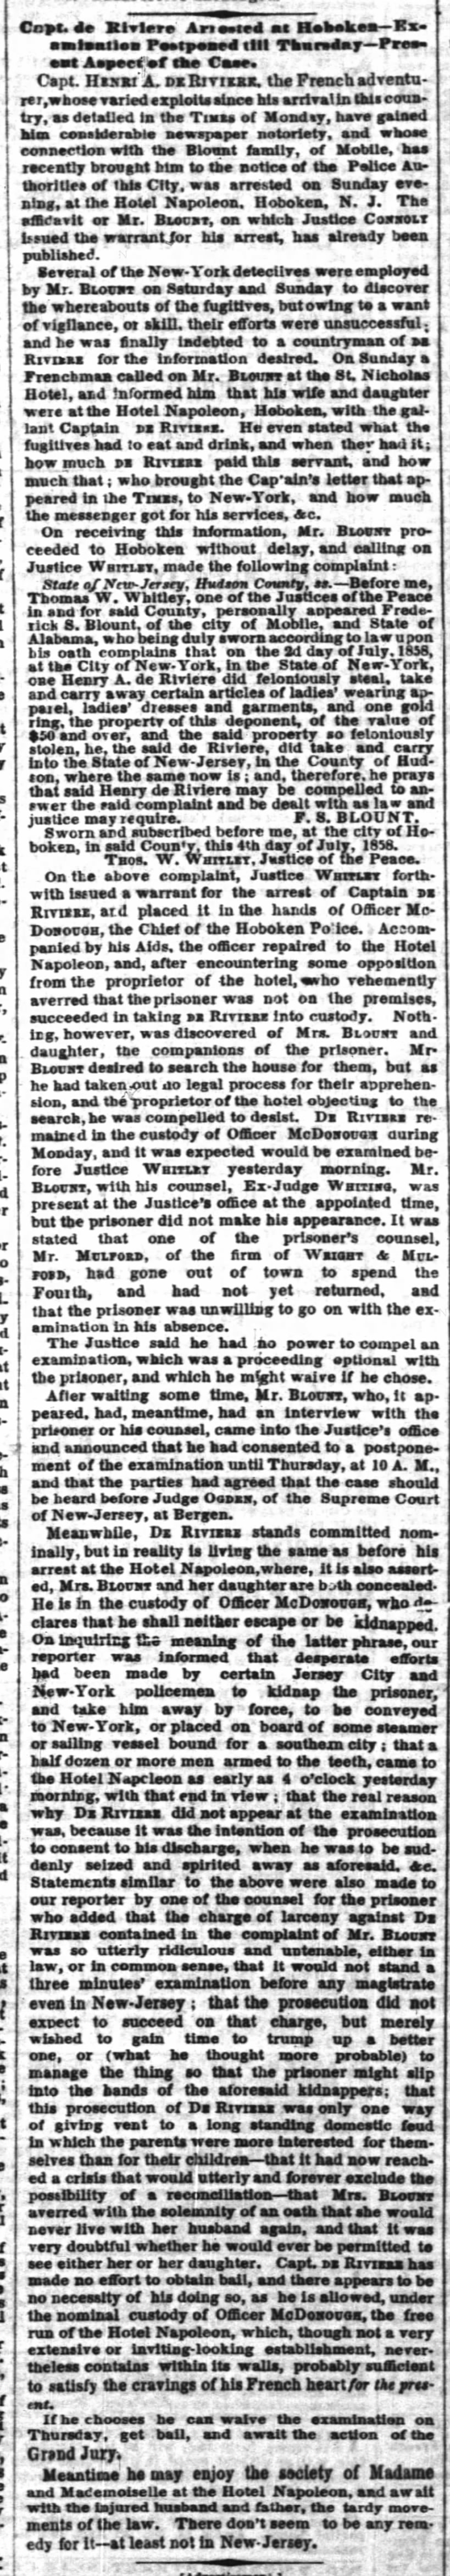 07 Jul 1858 -New York Times - Blount has De Riviere arrested.  Great story.